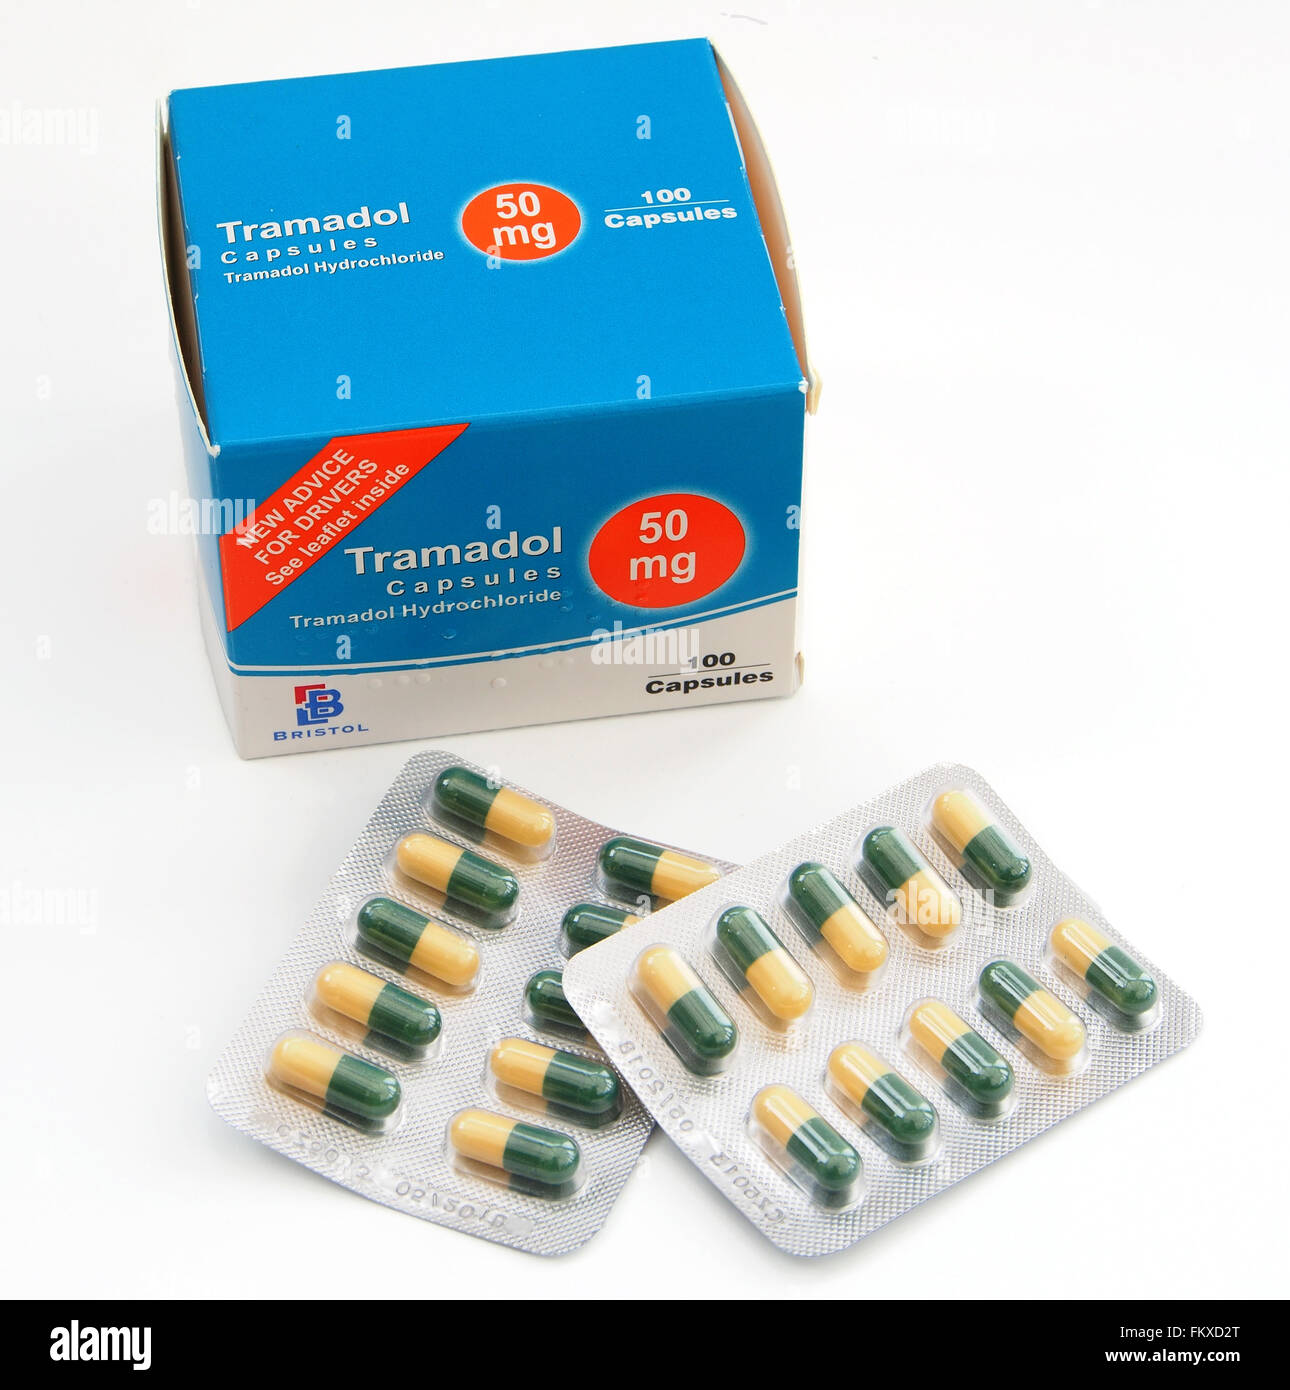 Tramadol 50mg Tablets Price With Insurance Online